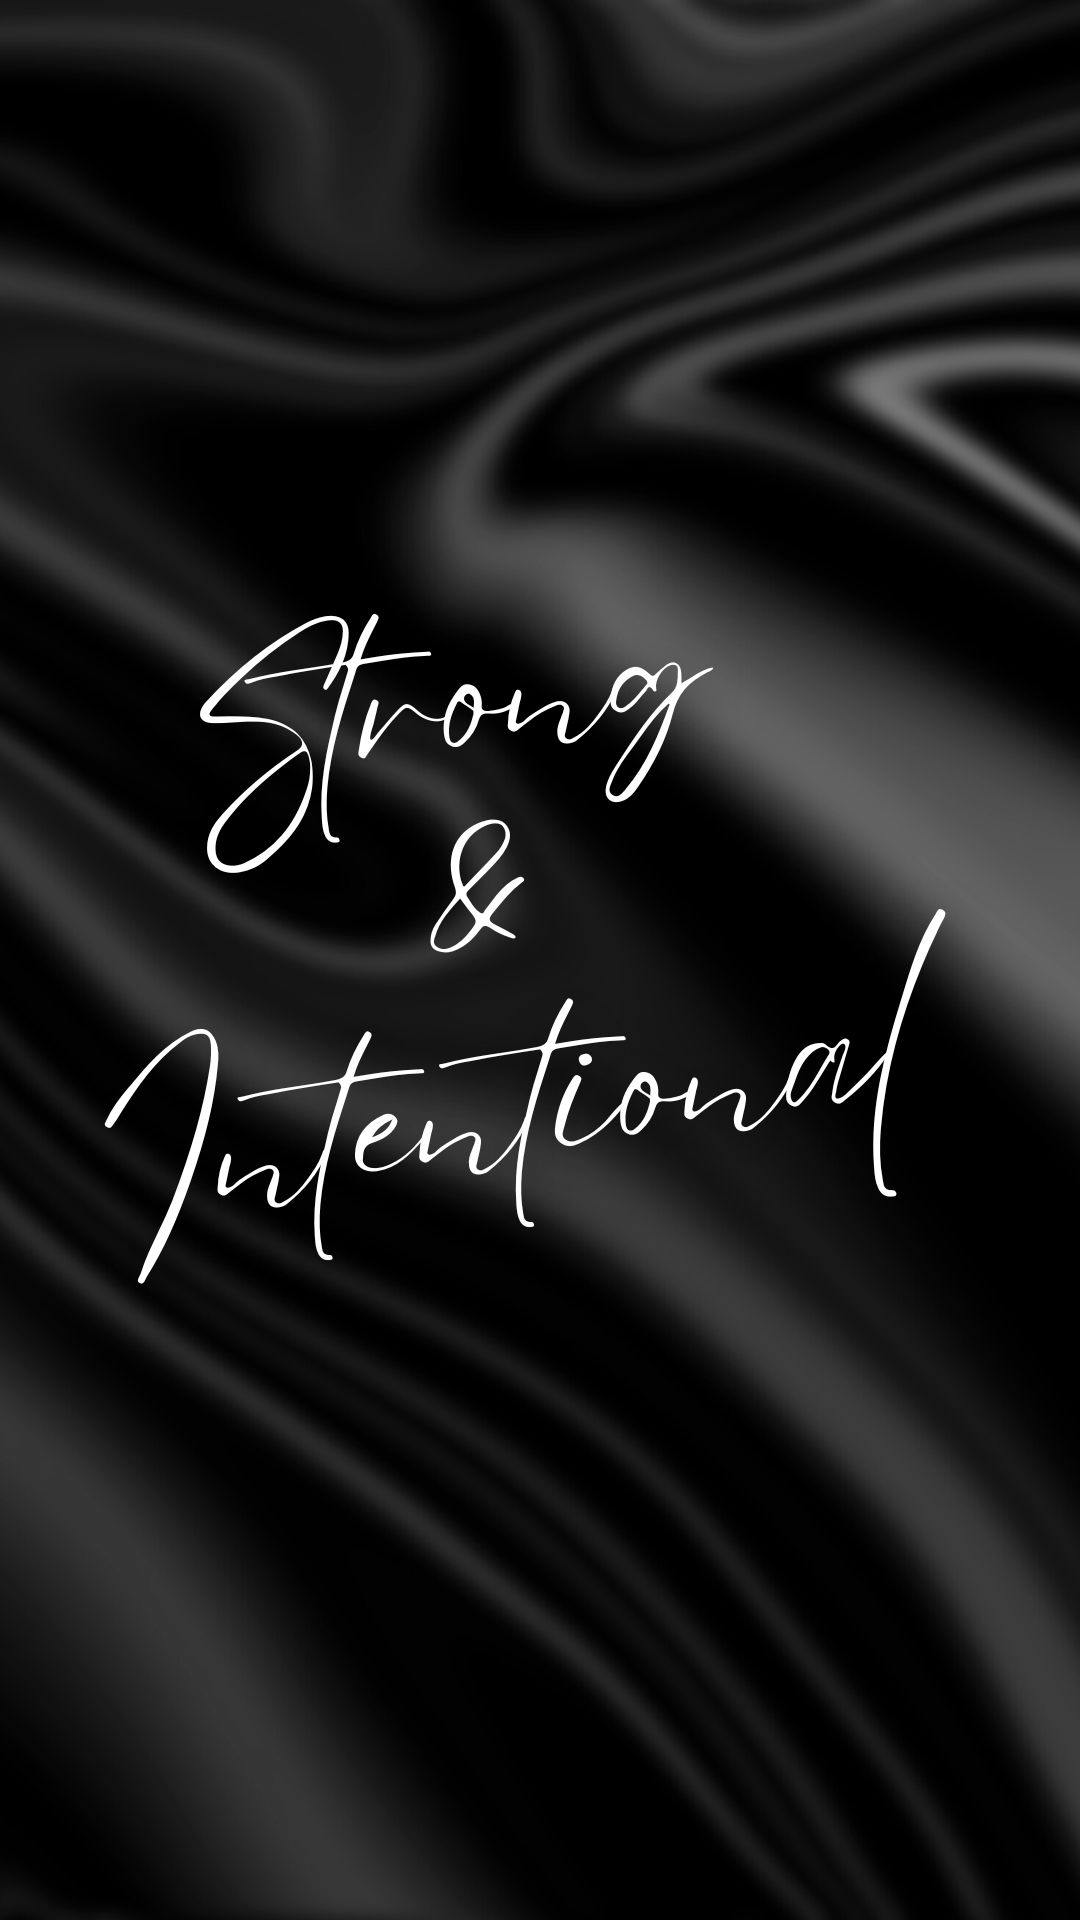 A black background with muted white swirls displays the text "Strong & Intentional" in a scripted white font.